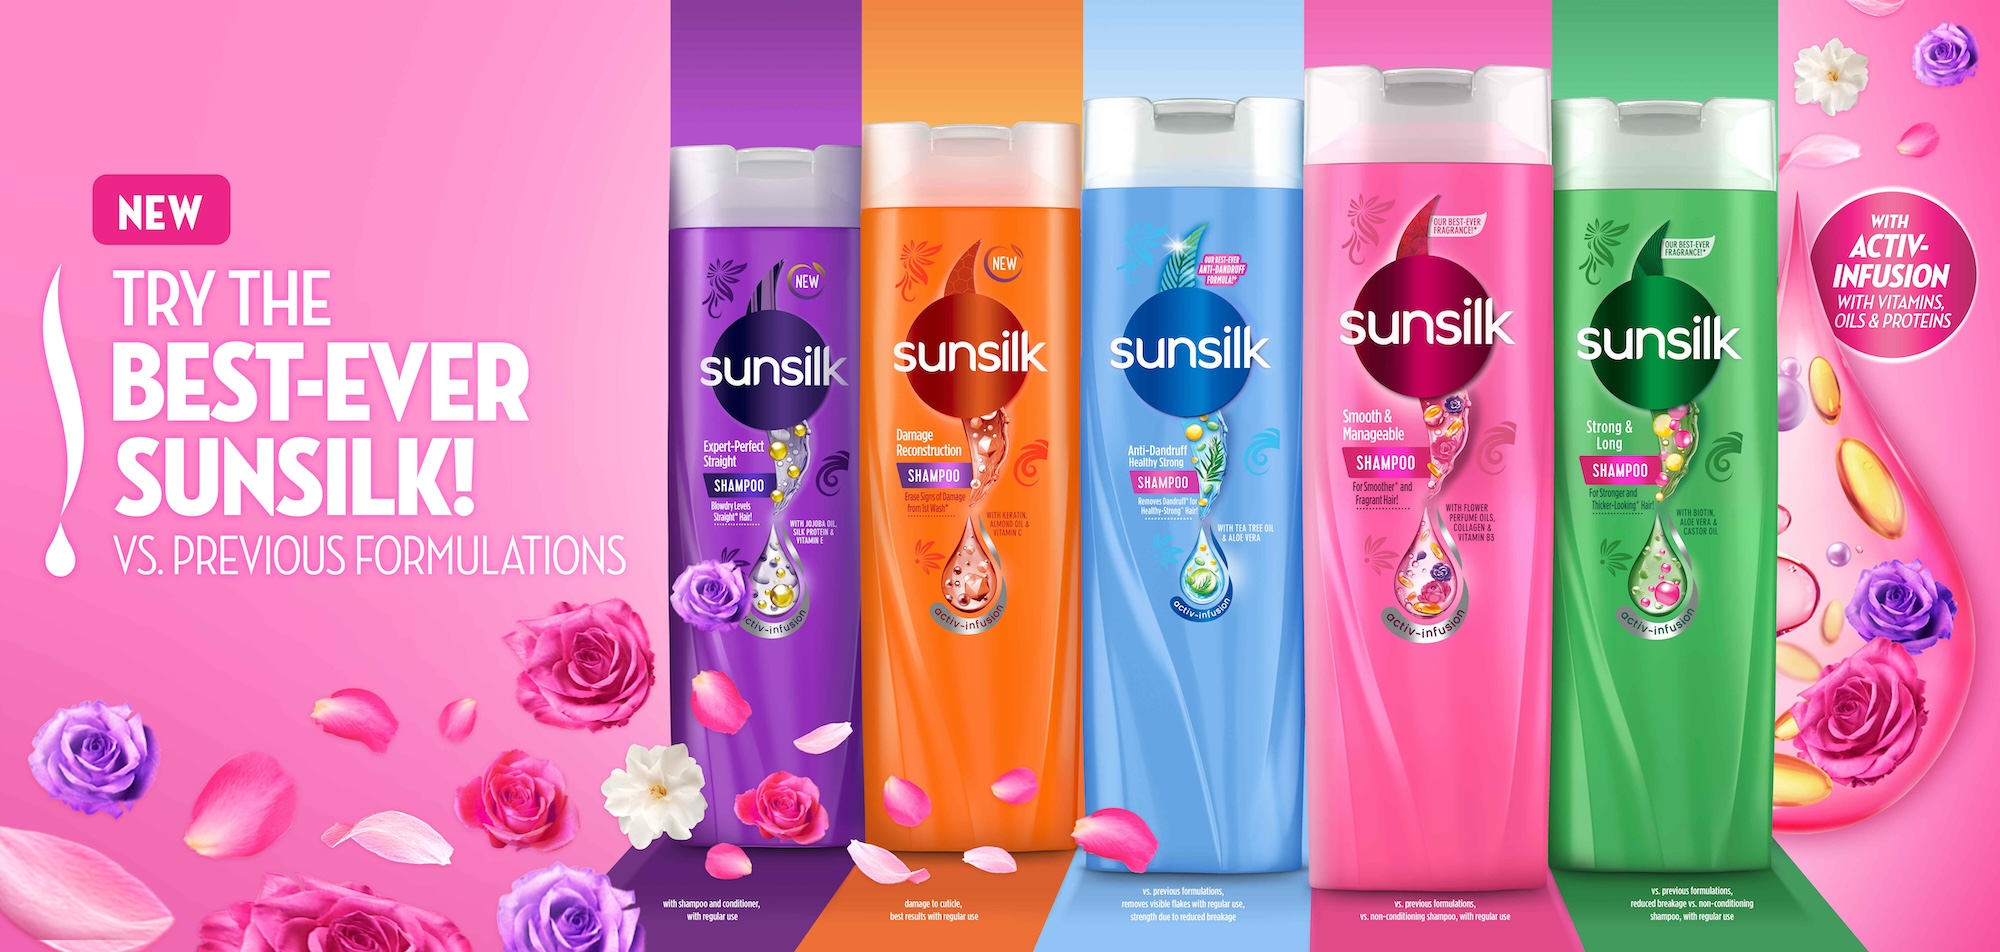 Now with their new best-ever fragrance, Sunsilk with Activ-Infusion is the secret weapon for those who want to conquer the world with confidence and grace